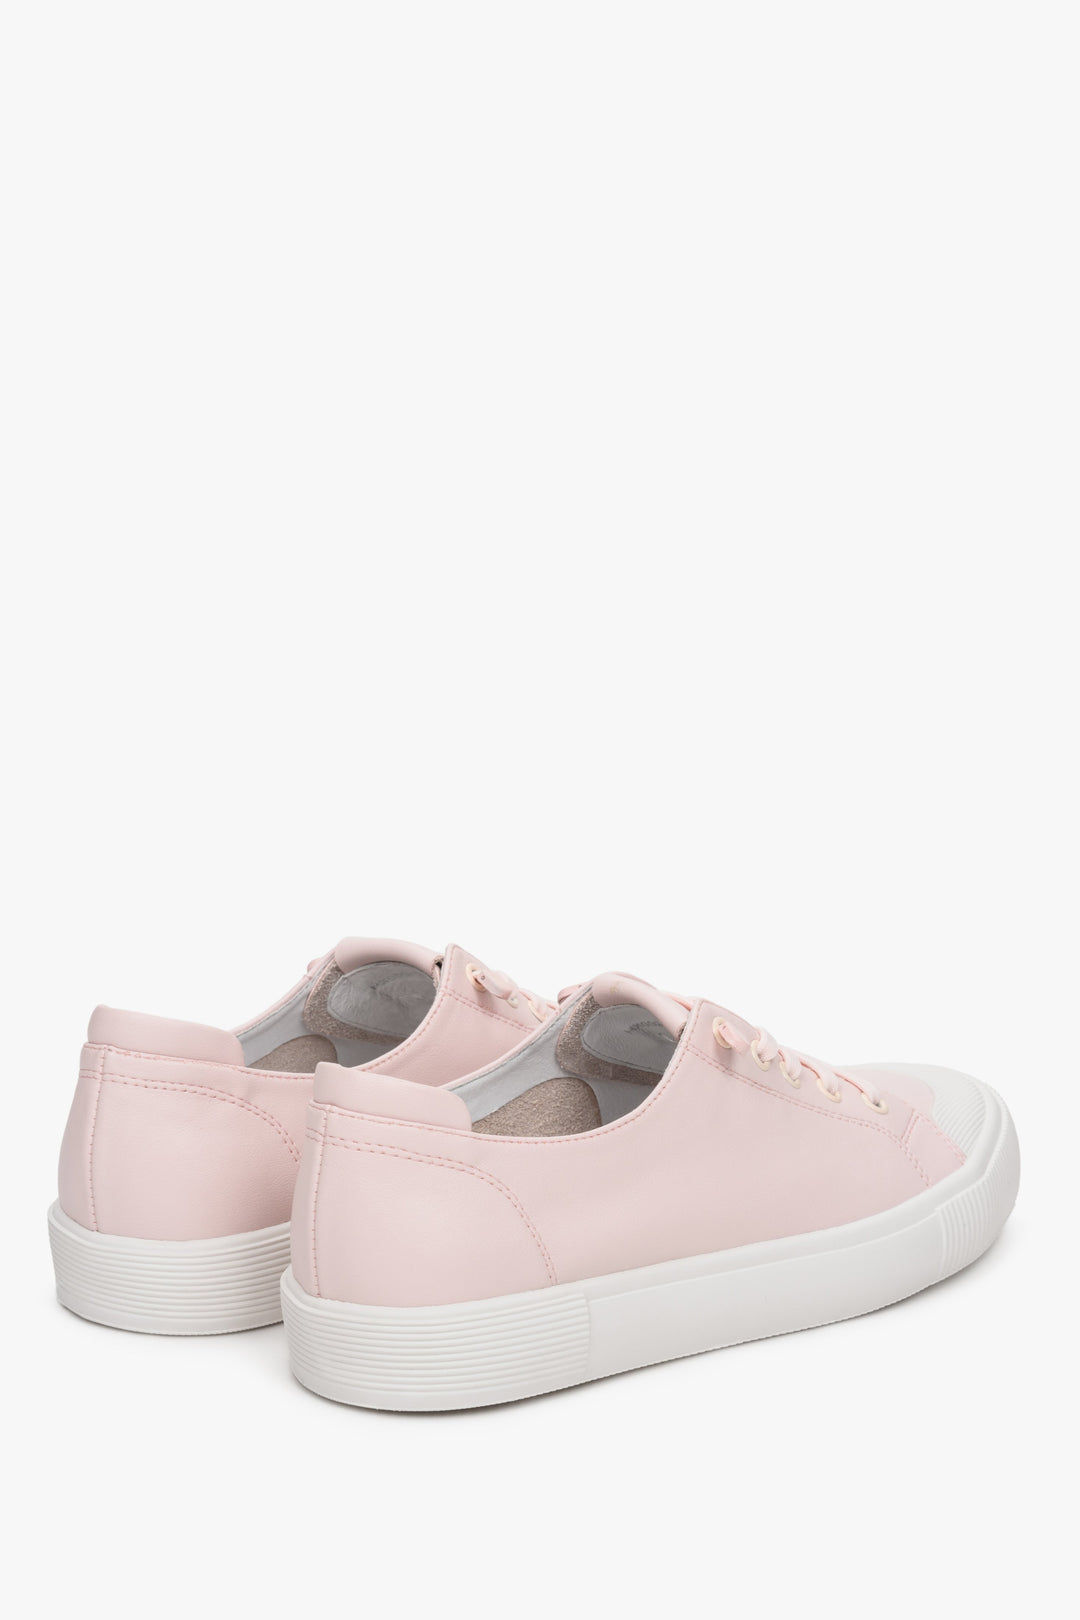 Women's Pale Pink Low-Top Genuine Leather Sneakers Estro ER00112701